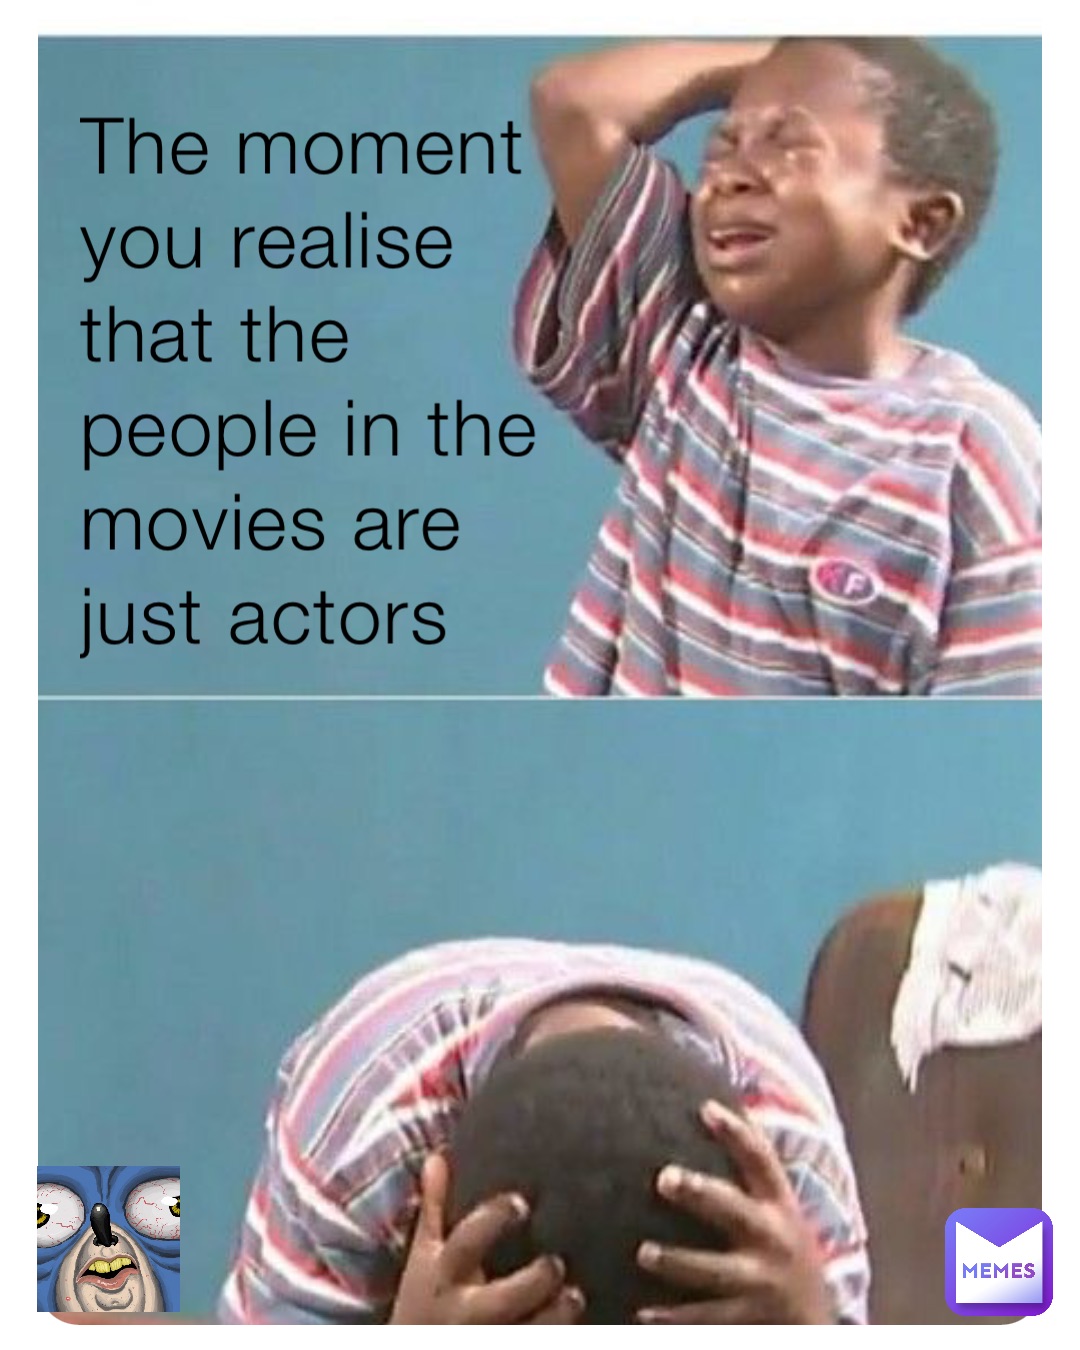 The moment you realise that the people in the movies are just actors